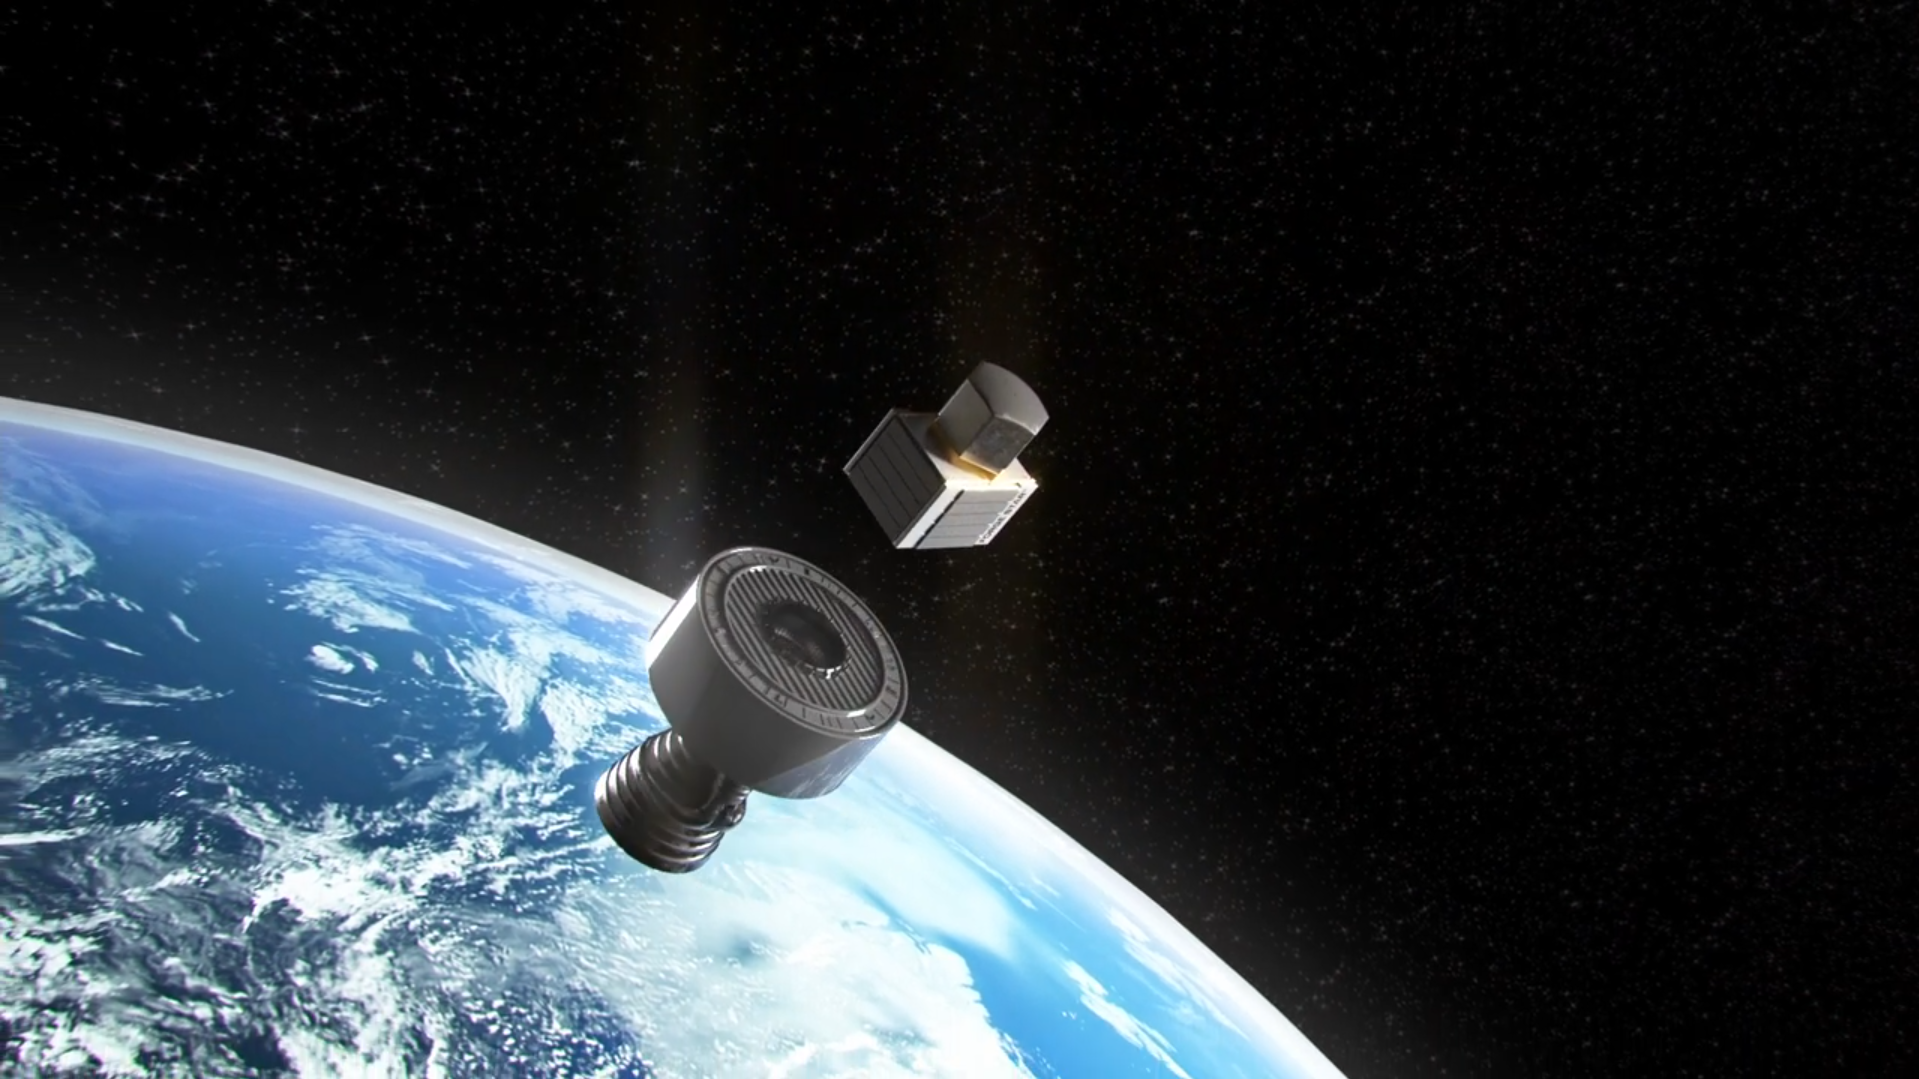 A space rocket detaches from its load in outer space in an artist's 3D rendering. The background is pure black, speckled with distant stars. Earth can be seen on the lower left corner of the image.